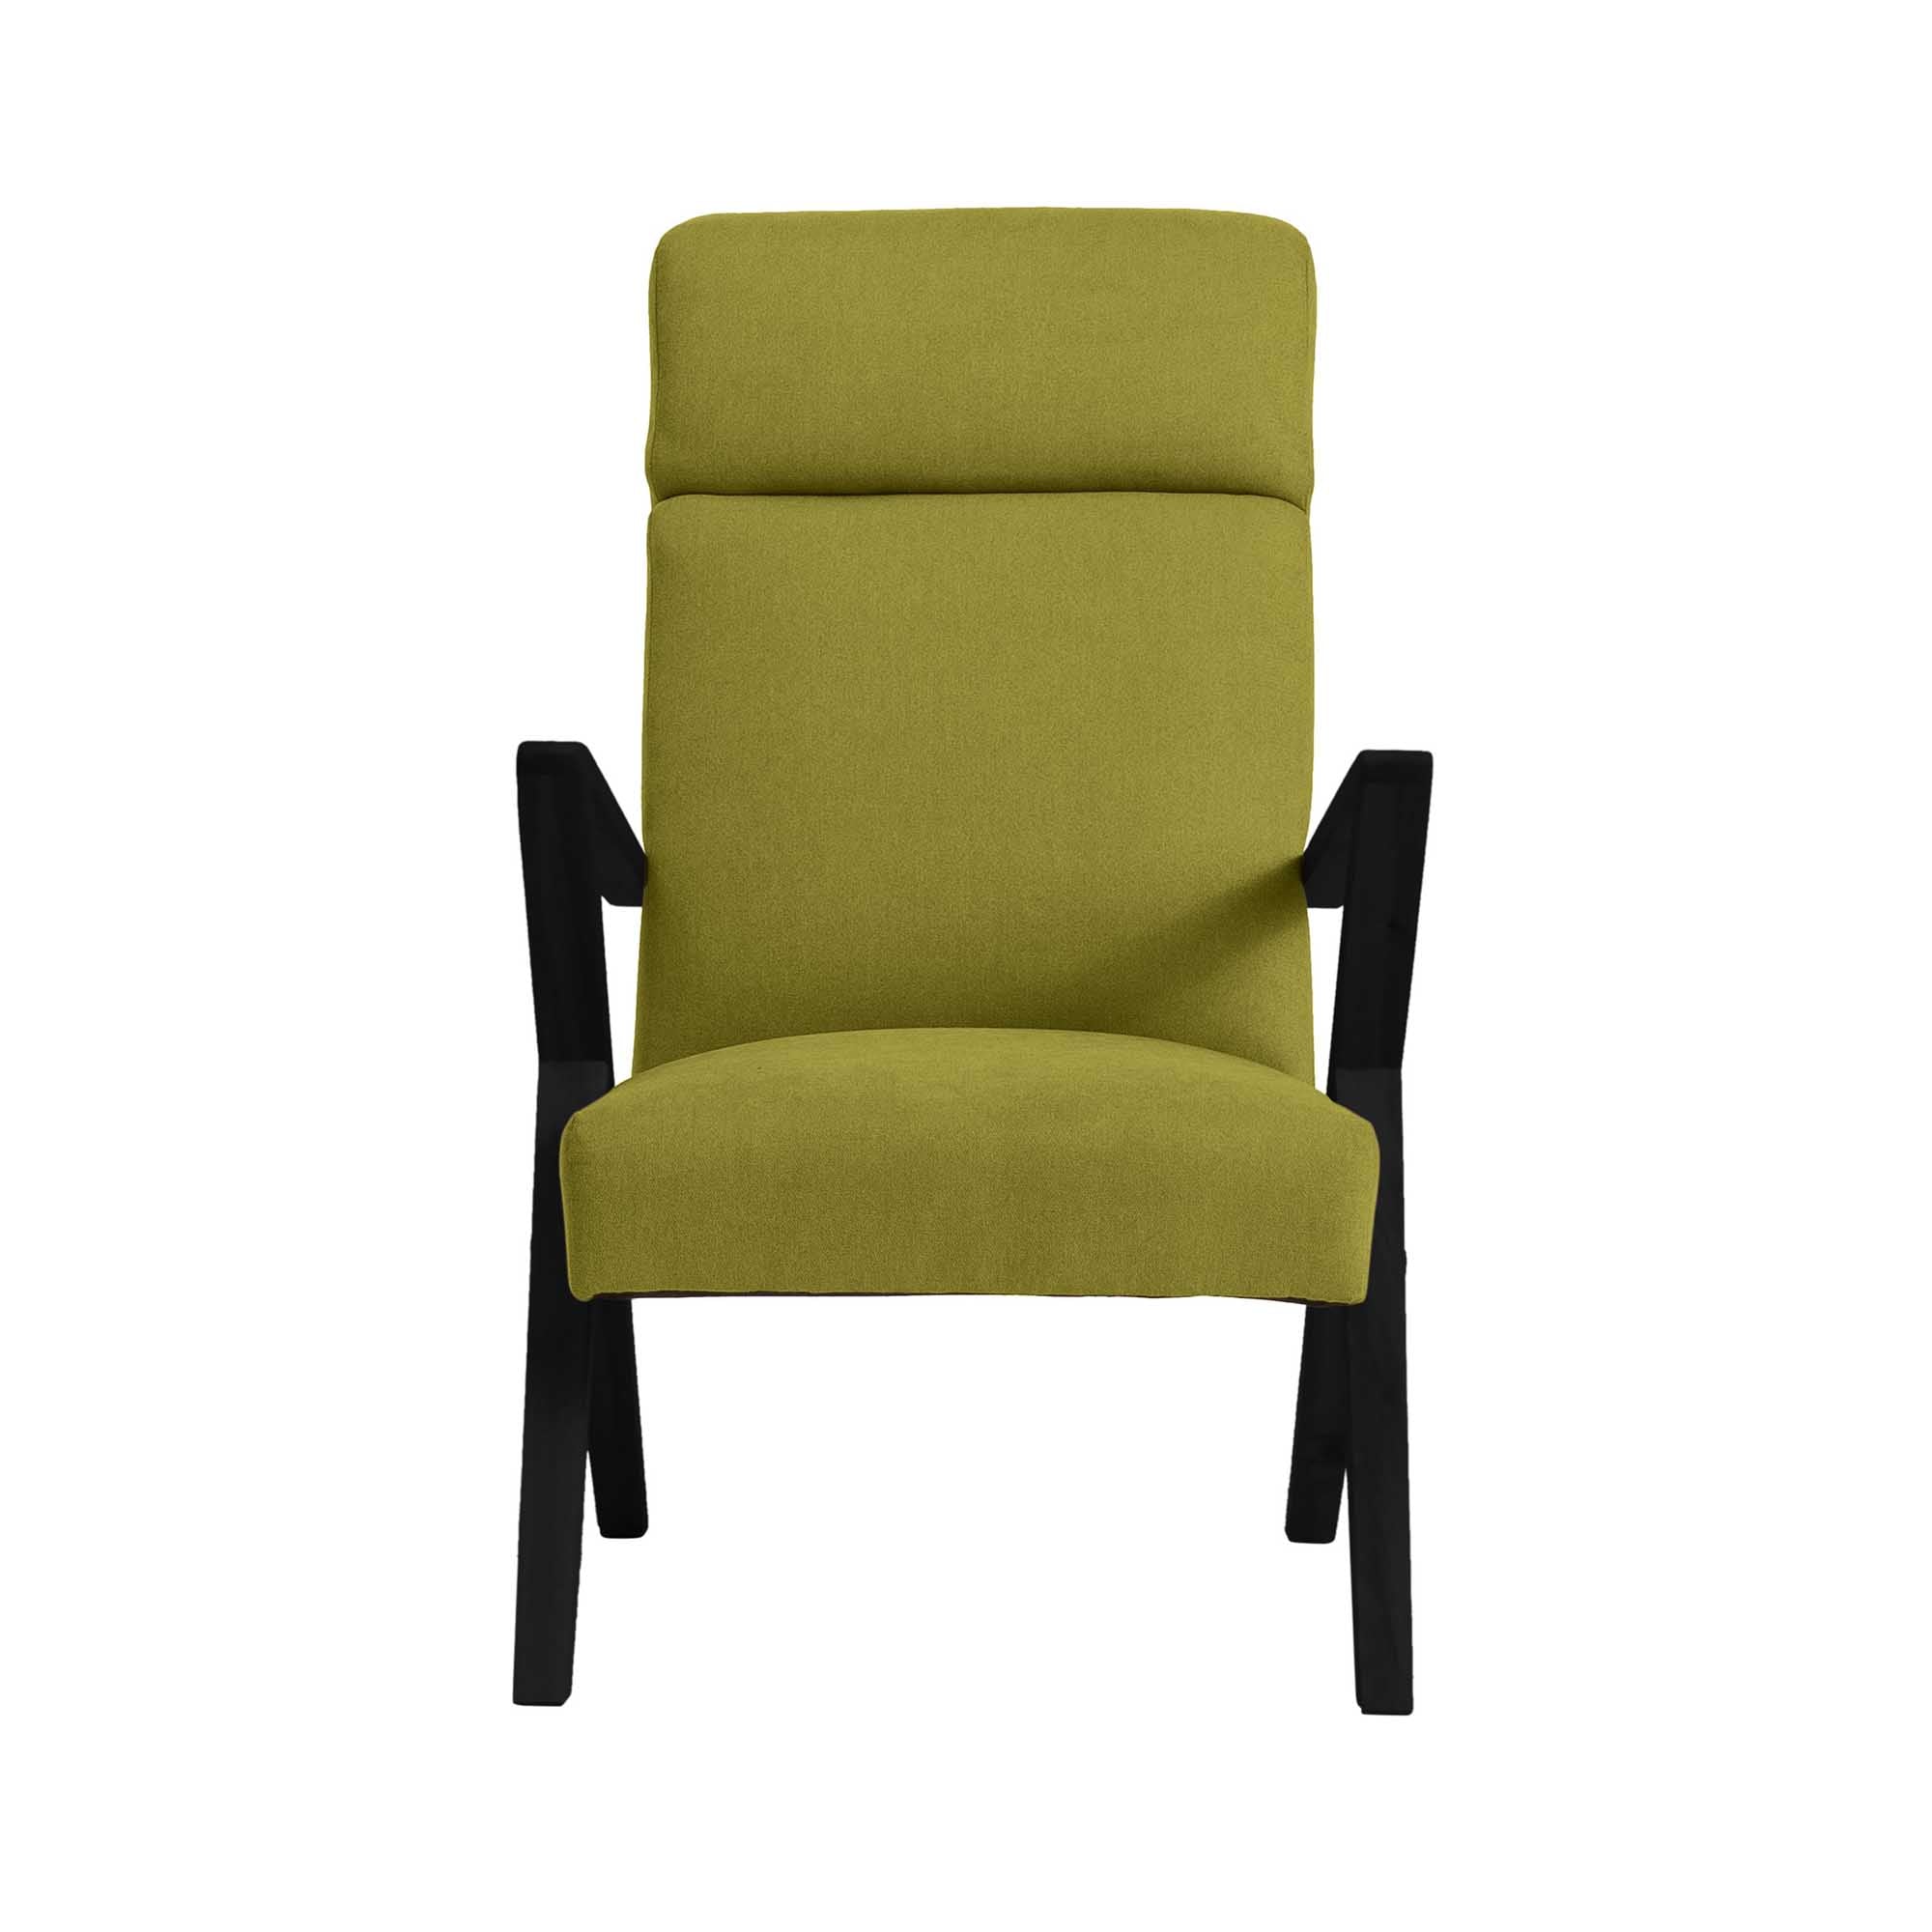 Lounge Chair, Beech Wood Frame, Black Lacquered green fabric, front view